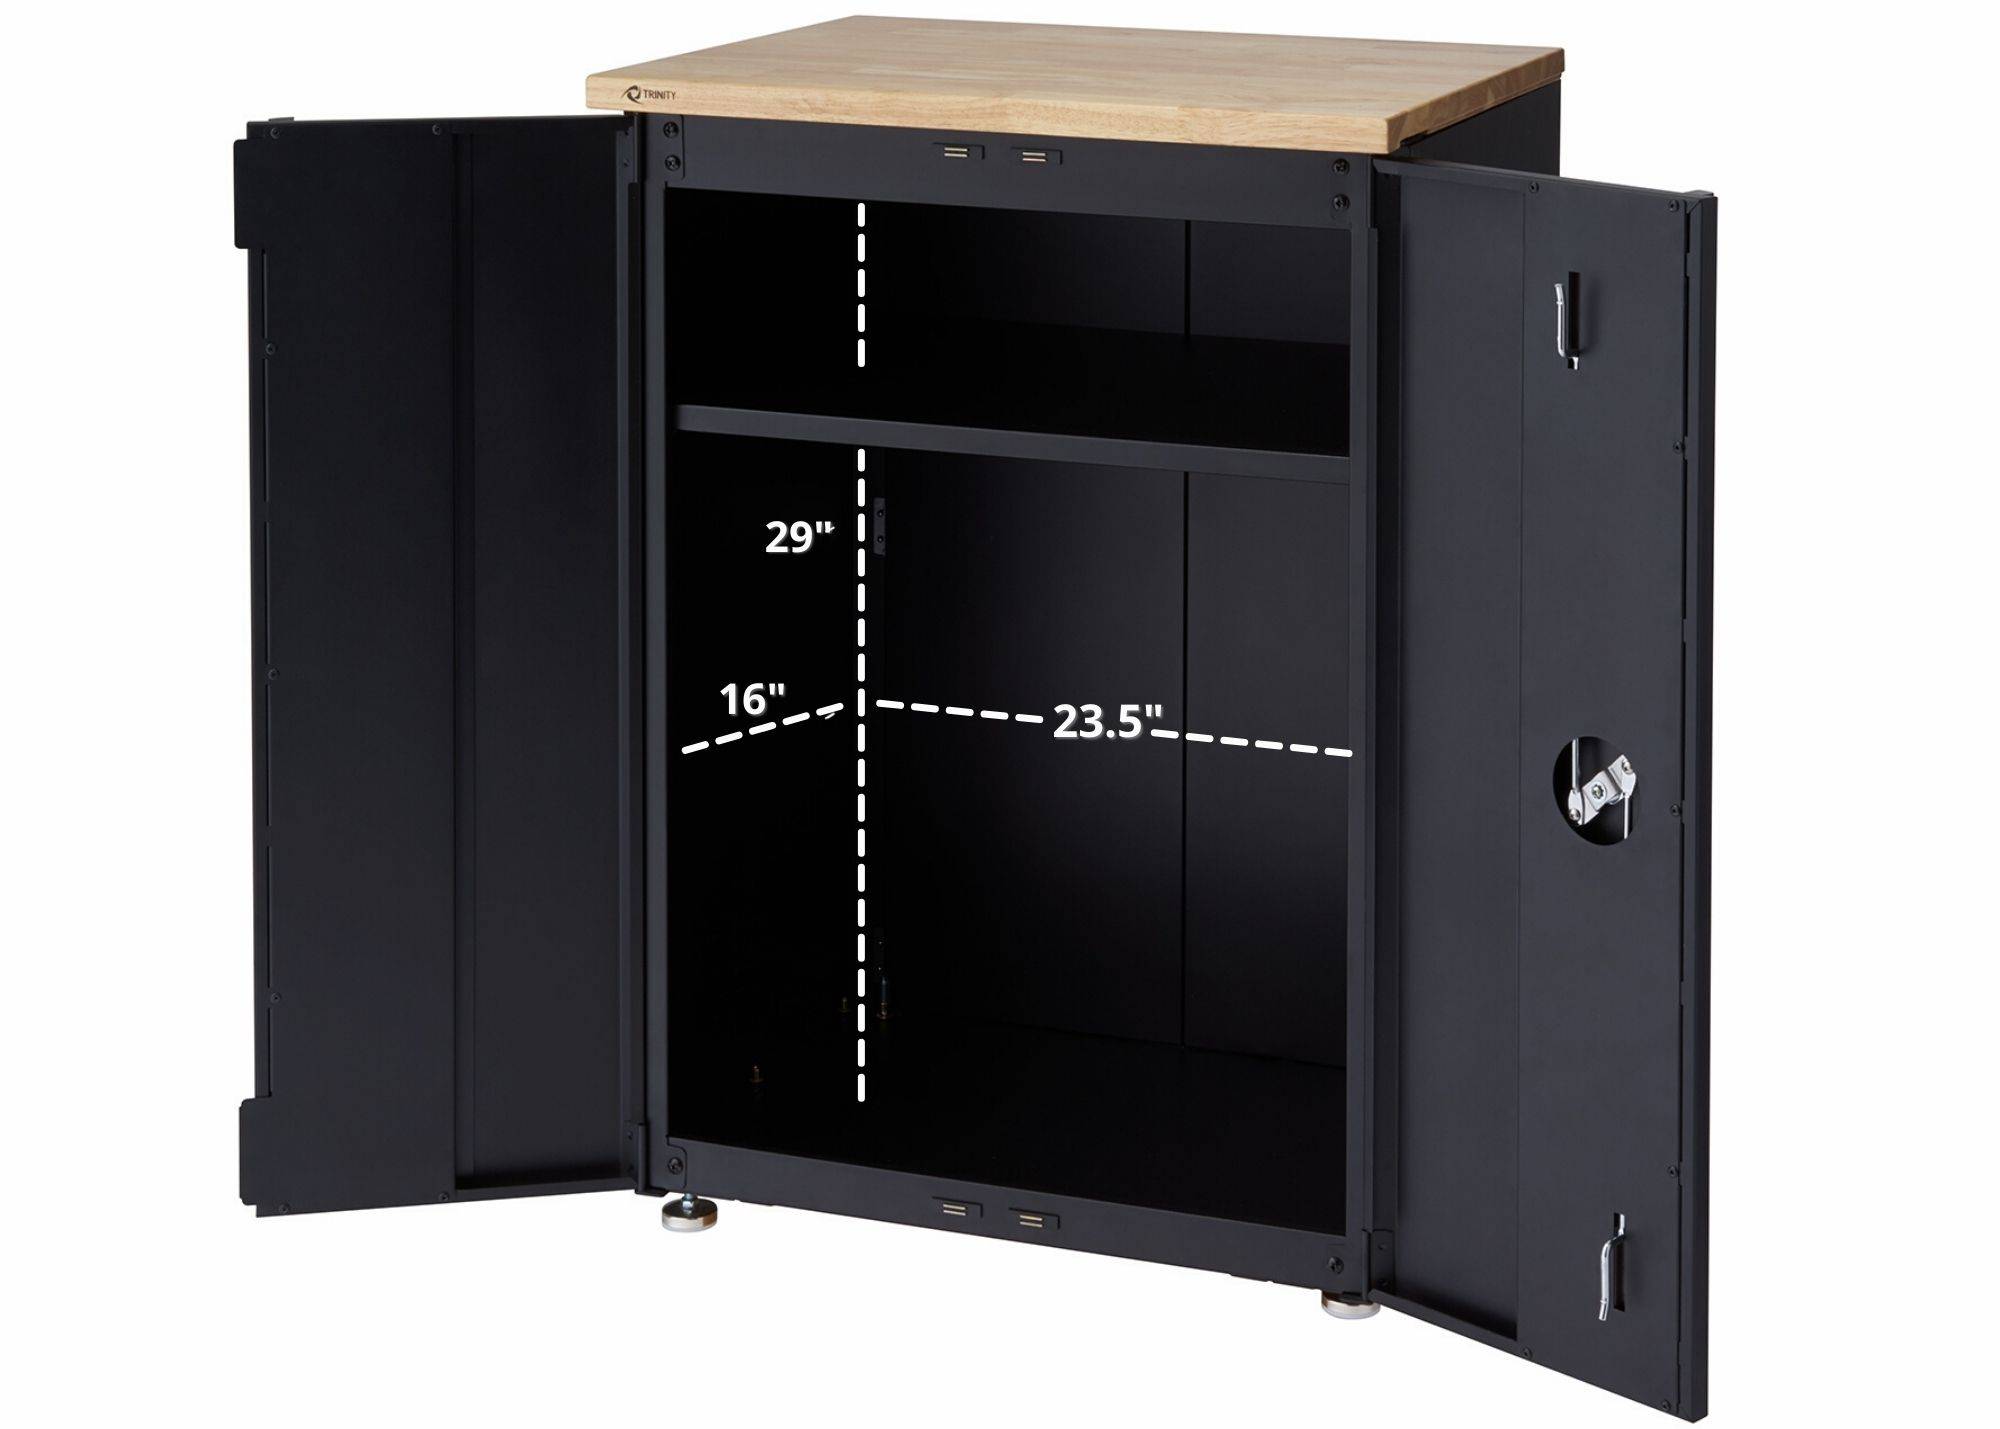 23.5 inches wide by 16 inches deep by 29 inches height interior cabinet dimensions